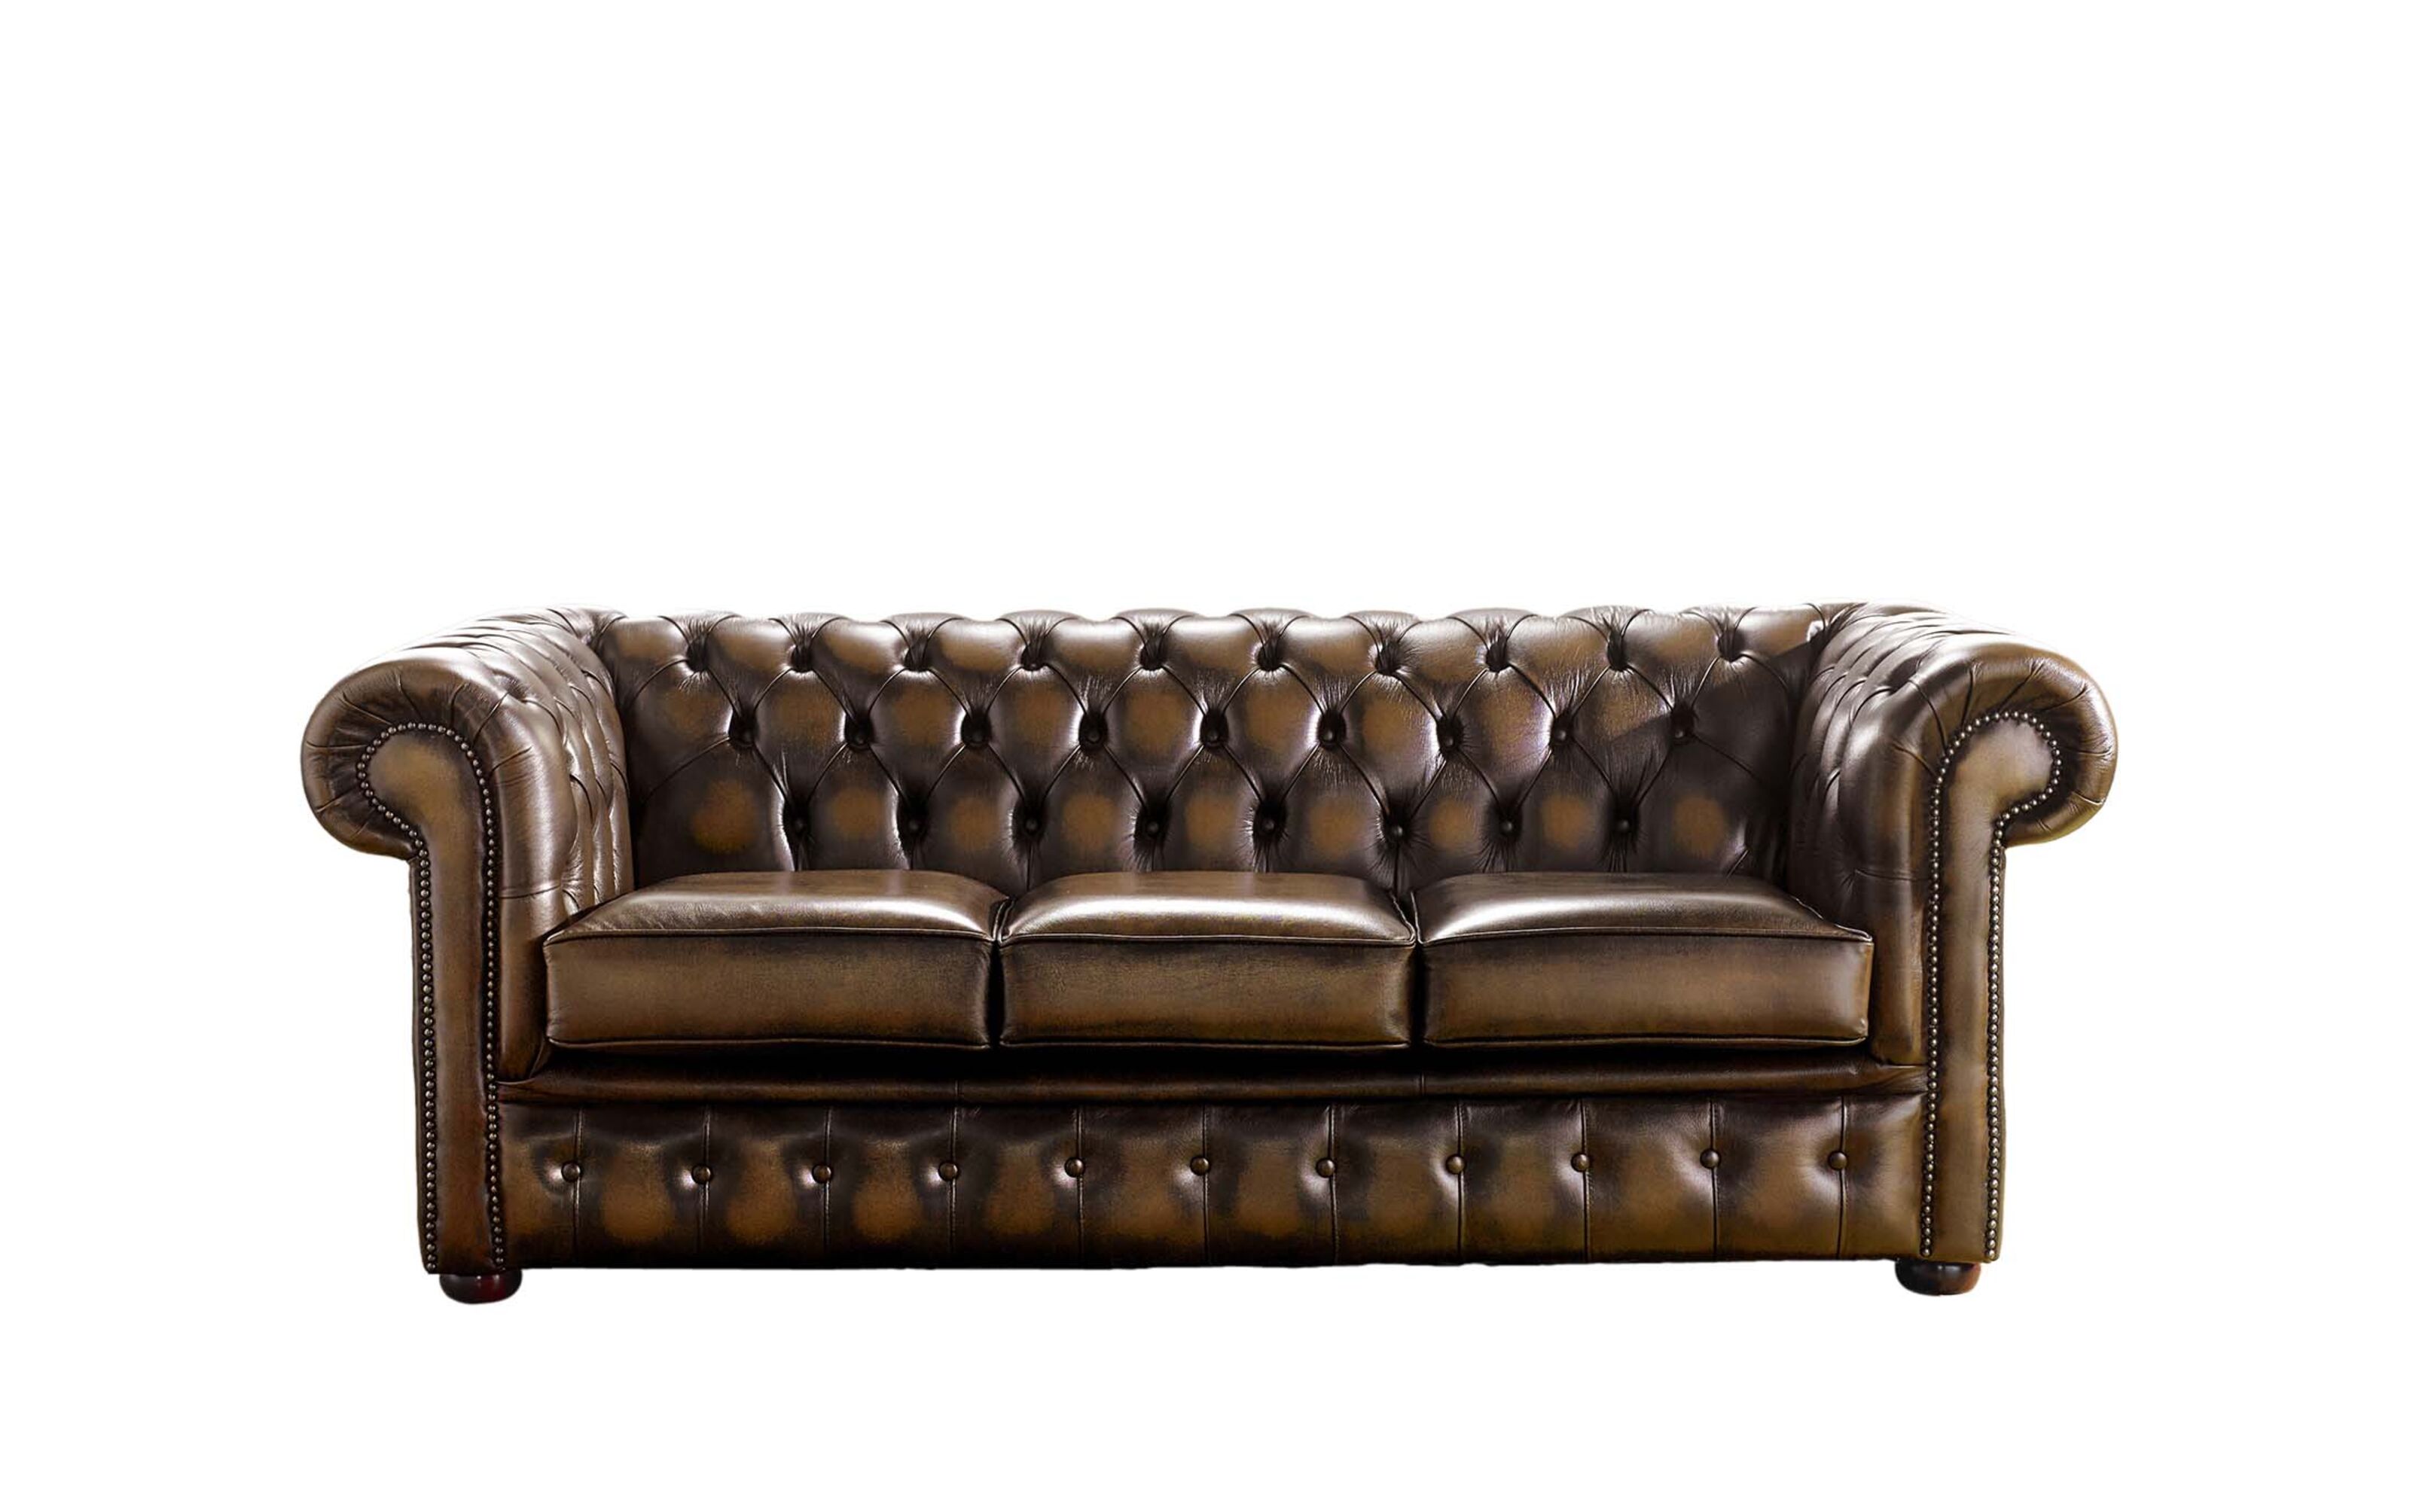 Masters of Tradition The Craftsmen Behind Chesterfield Sofa Creation  %Post Title